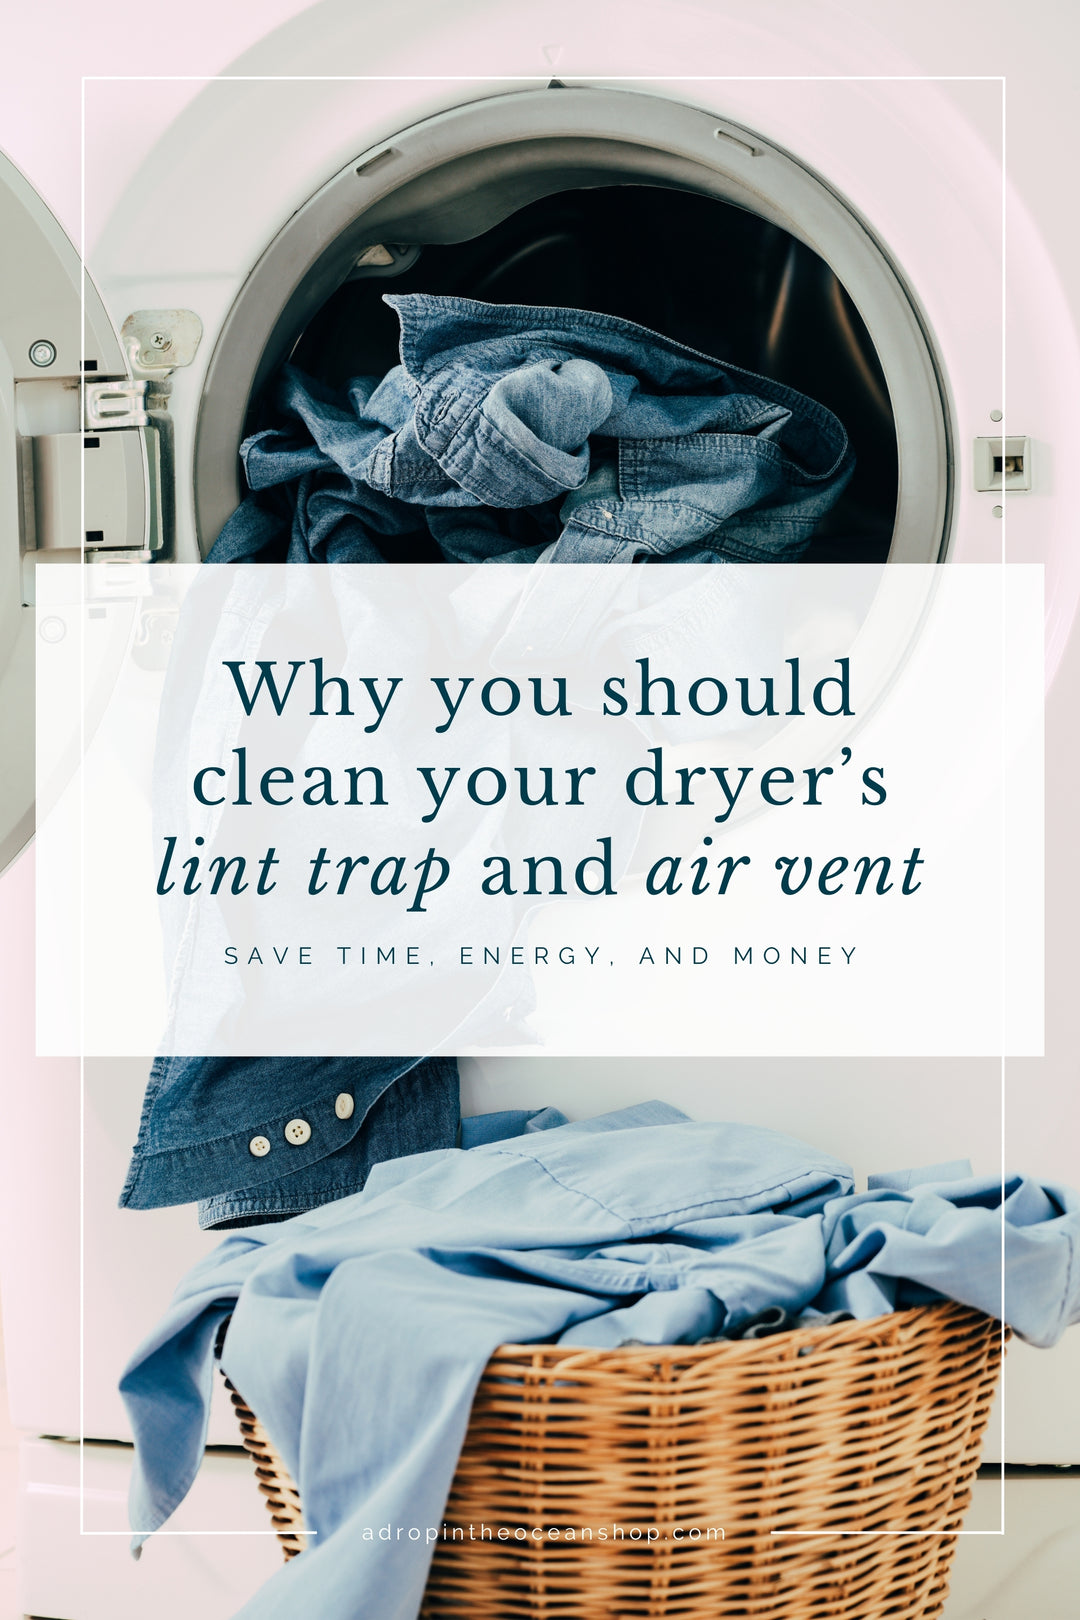 A Drop in the Ocean Zero Waste Blog: Why You Should Clean Your Dryer's Lint Trap and Air Vent